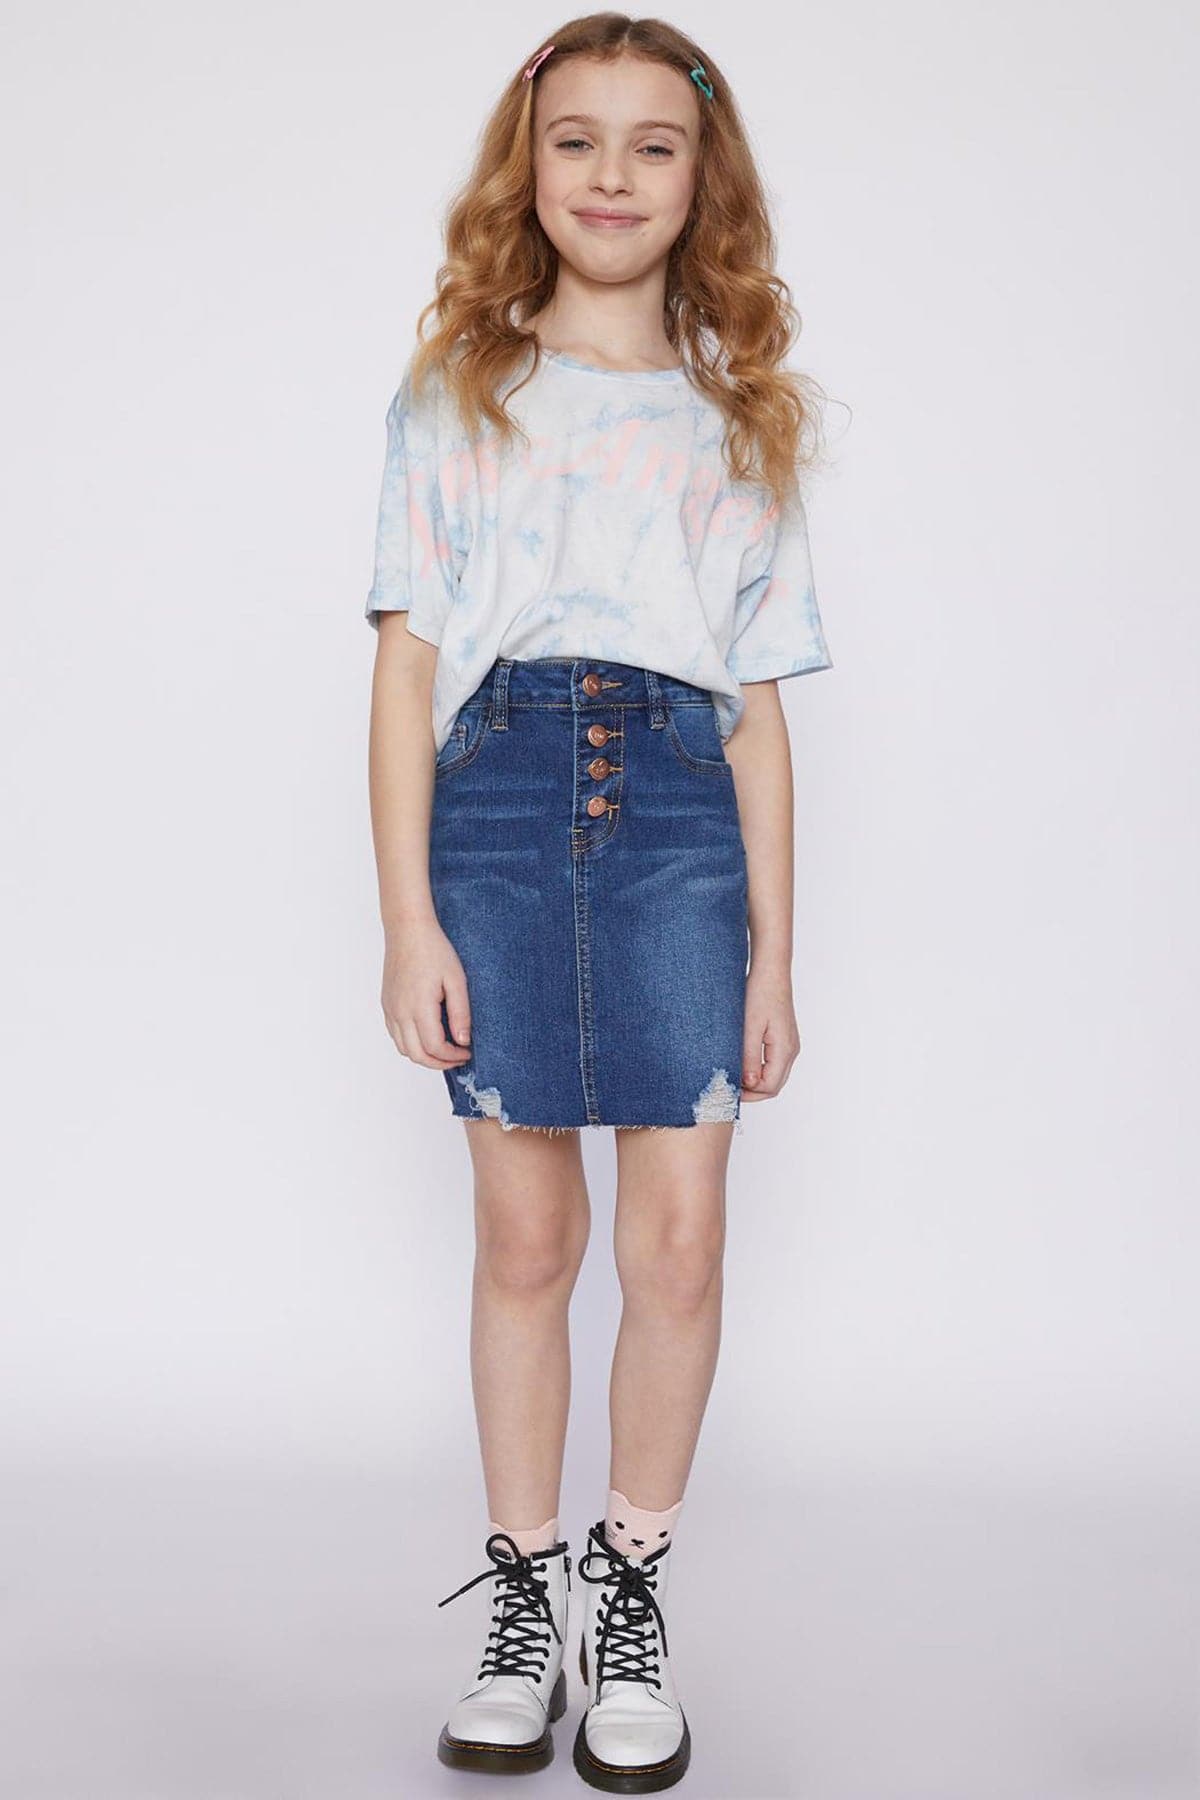 Girls Four Button Denim Skirt With Distressed Details Deal